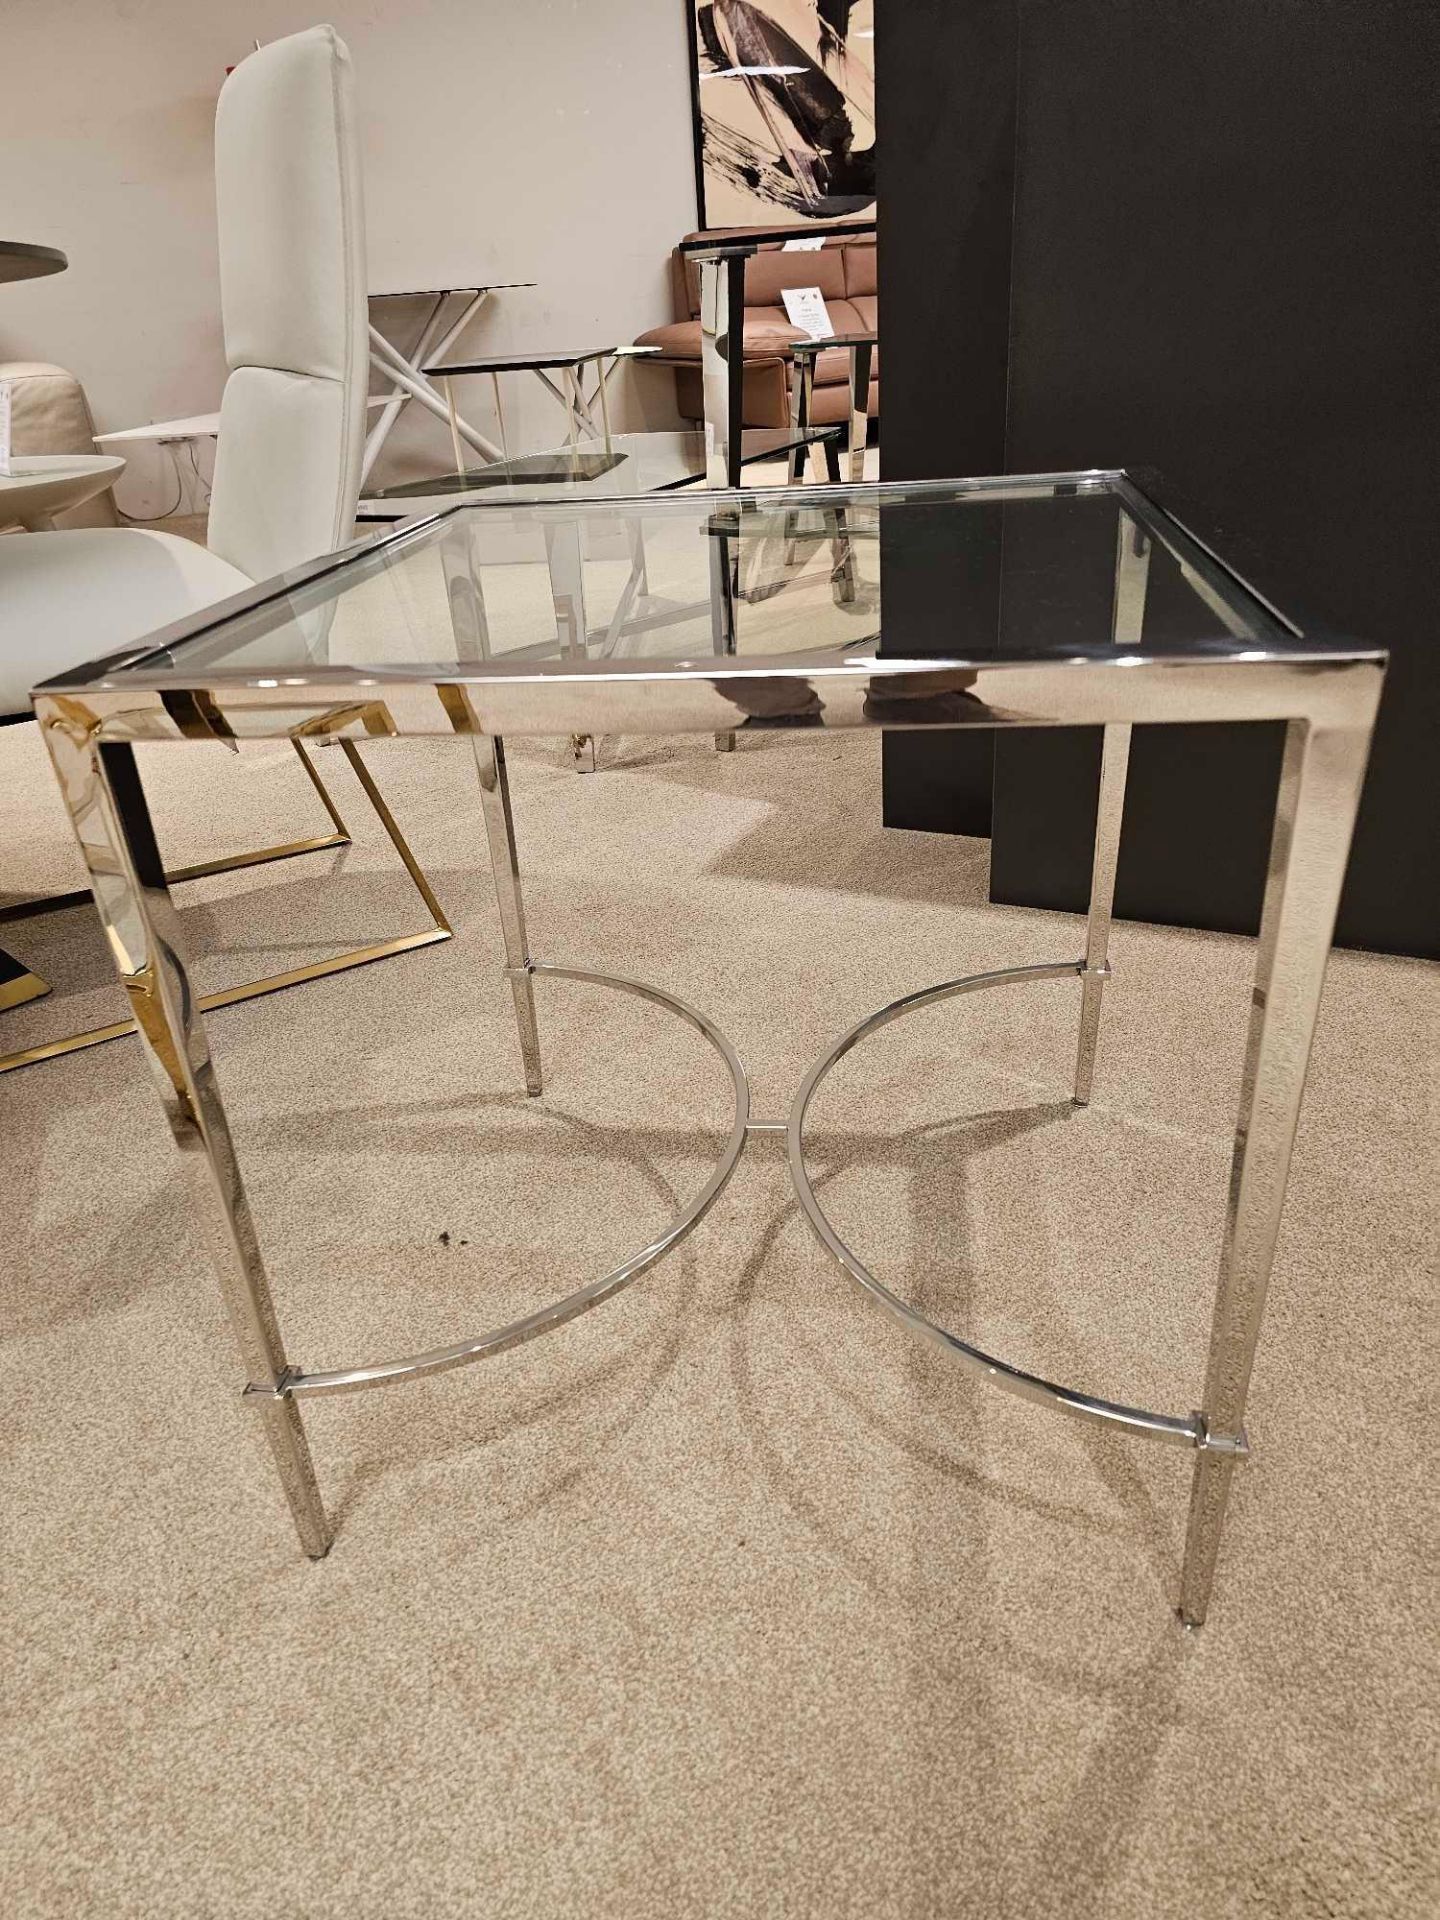 Tokyo Lamp Table by Kesterport The Tokyo lamp table with its clear glass top and a refined tapered - Bild 4 aus 6